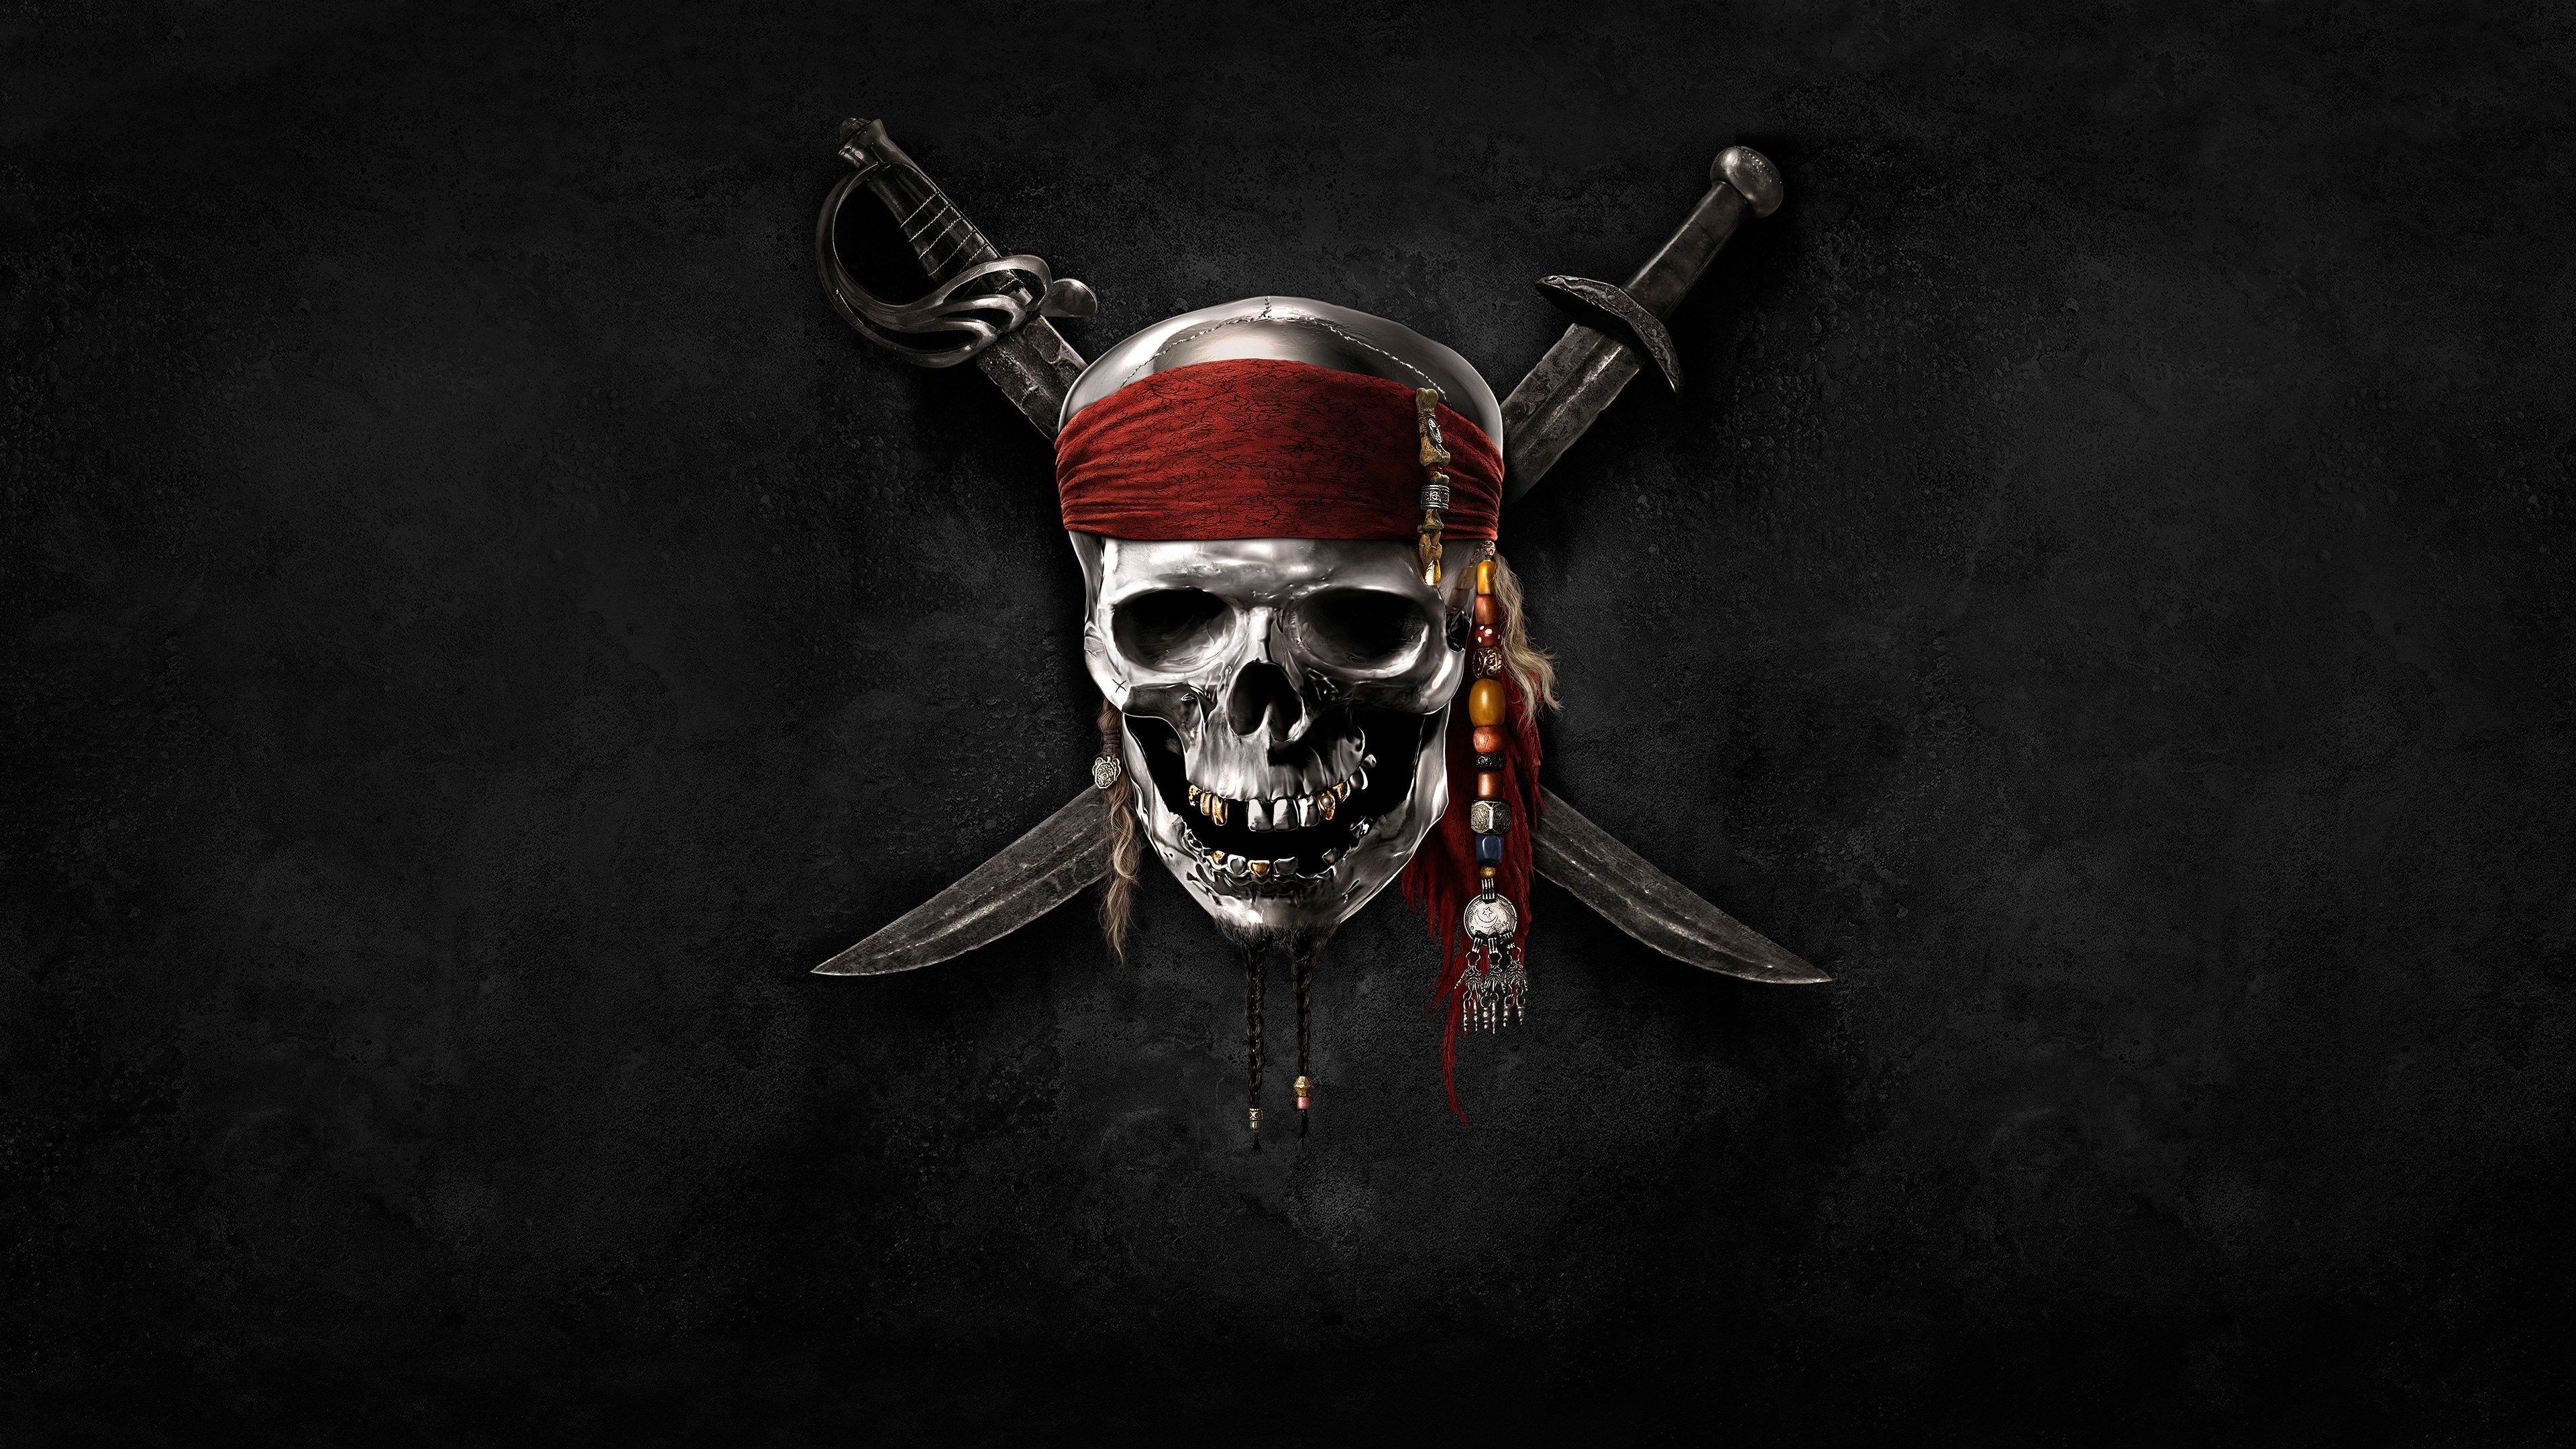 Picture for Desktop: pirates of the caribbean. Skull wallpaper, Pirates of the caribbean, HD skull wallpaper